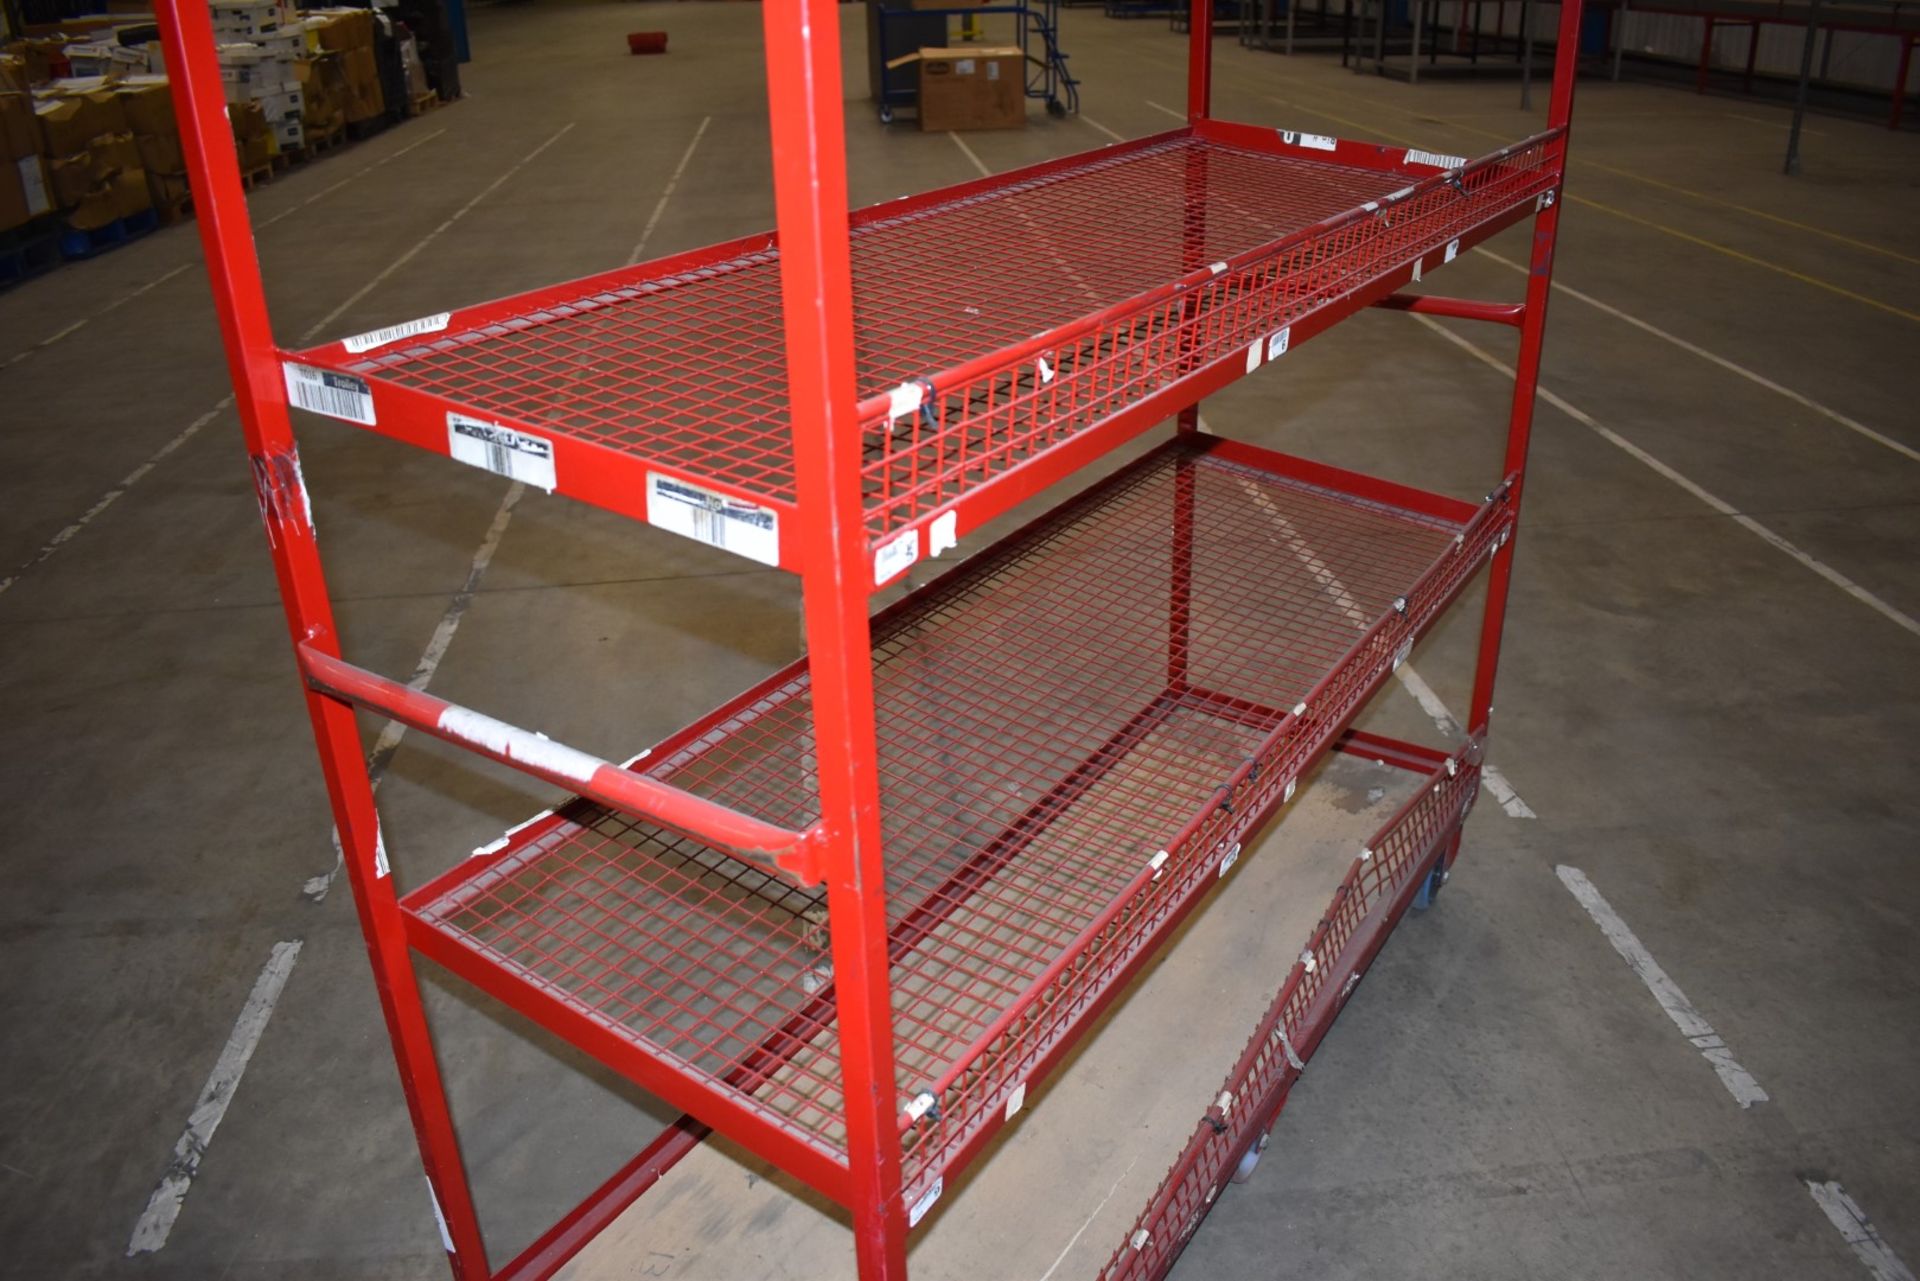 5 x Four Tier Metal Shelf Units on Castors - Ideal For Warehouses or Offices etc - H180 x W160 x D55 - Image 4 of 4